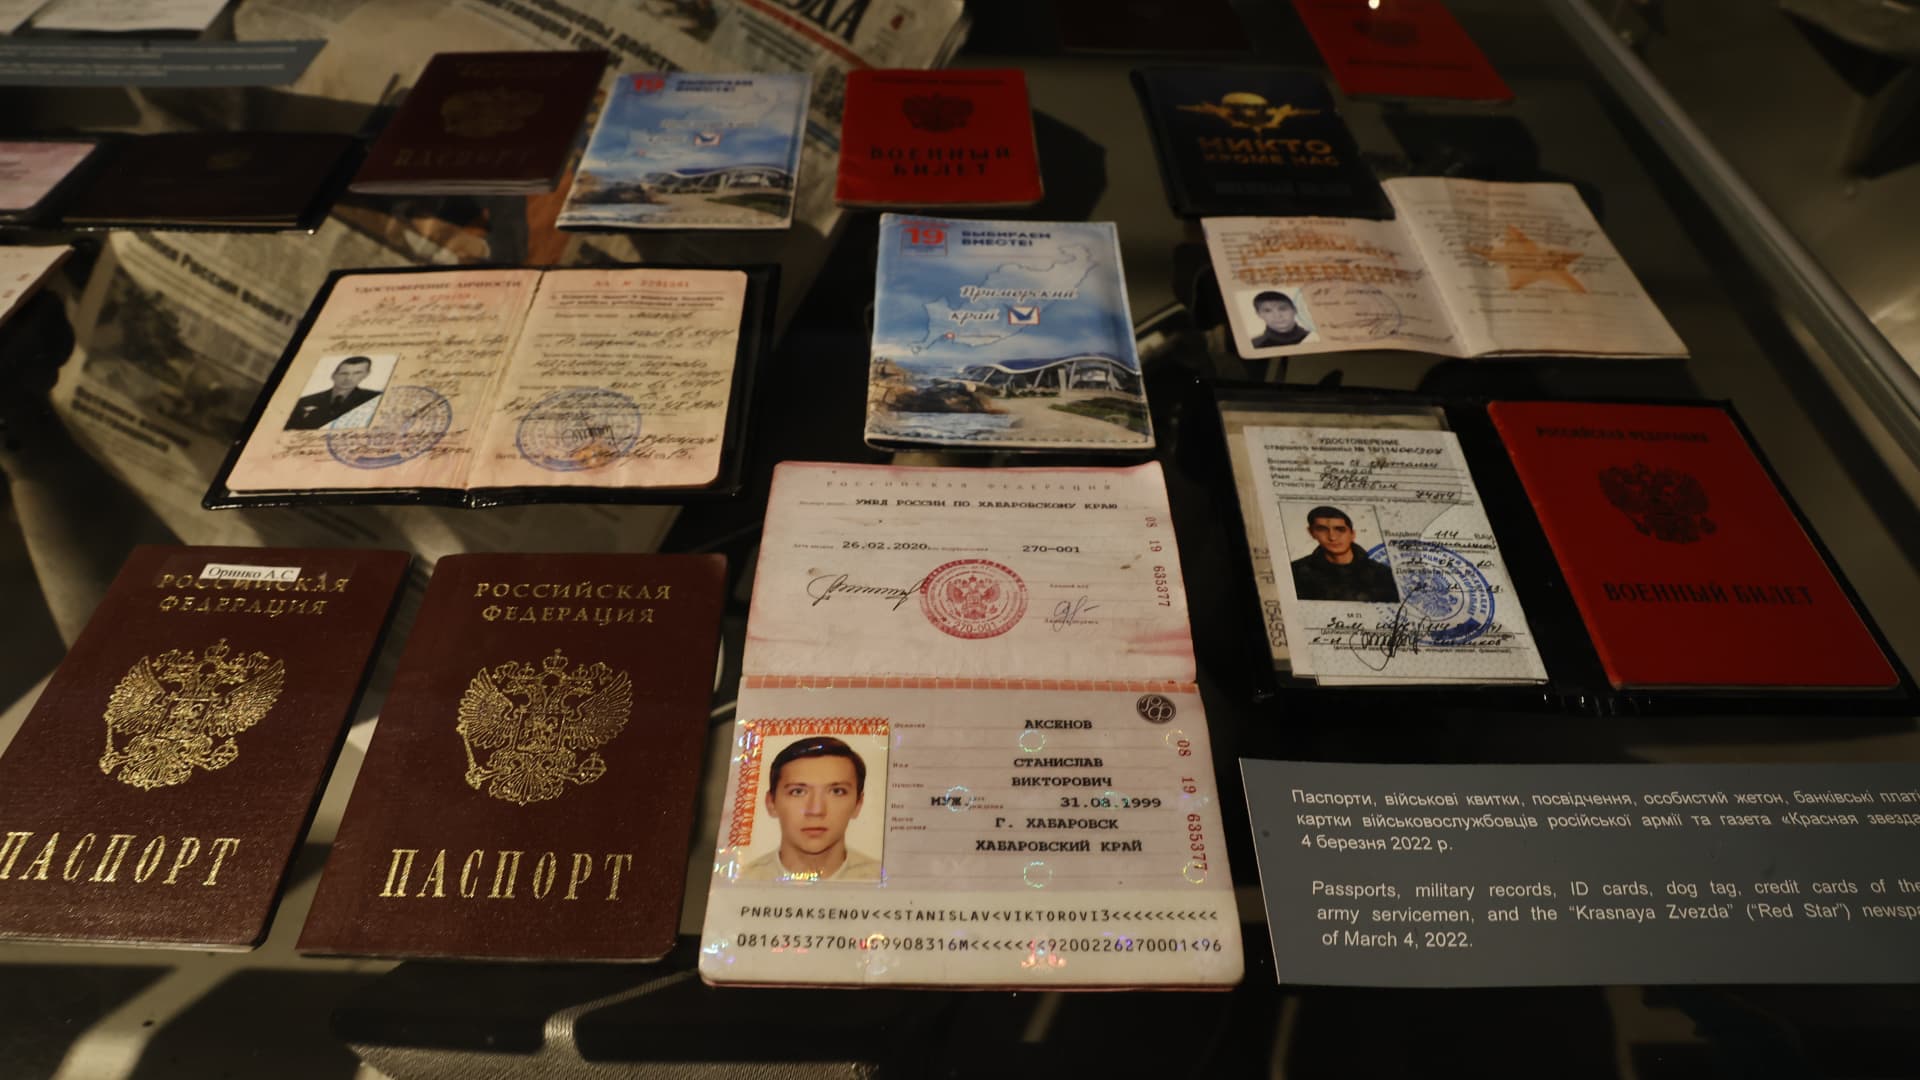 Passports and IDs of Russian military forces are seen at National Museum of the History of Ukraine in World War II in Kyiv, Ukraine on May 10, 2022.